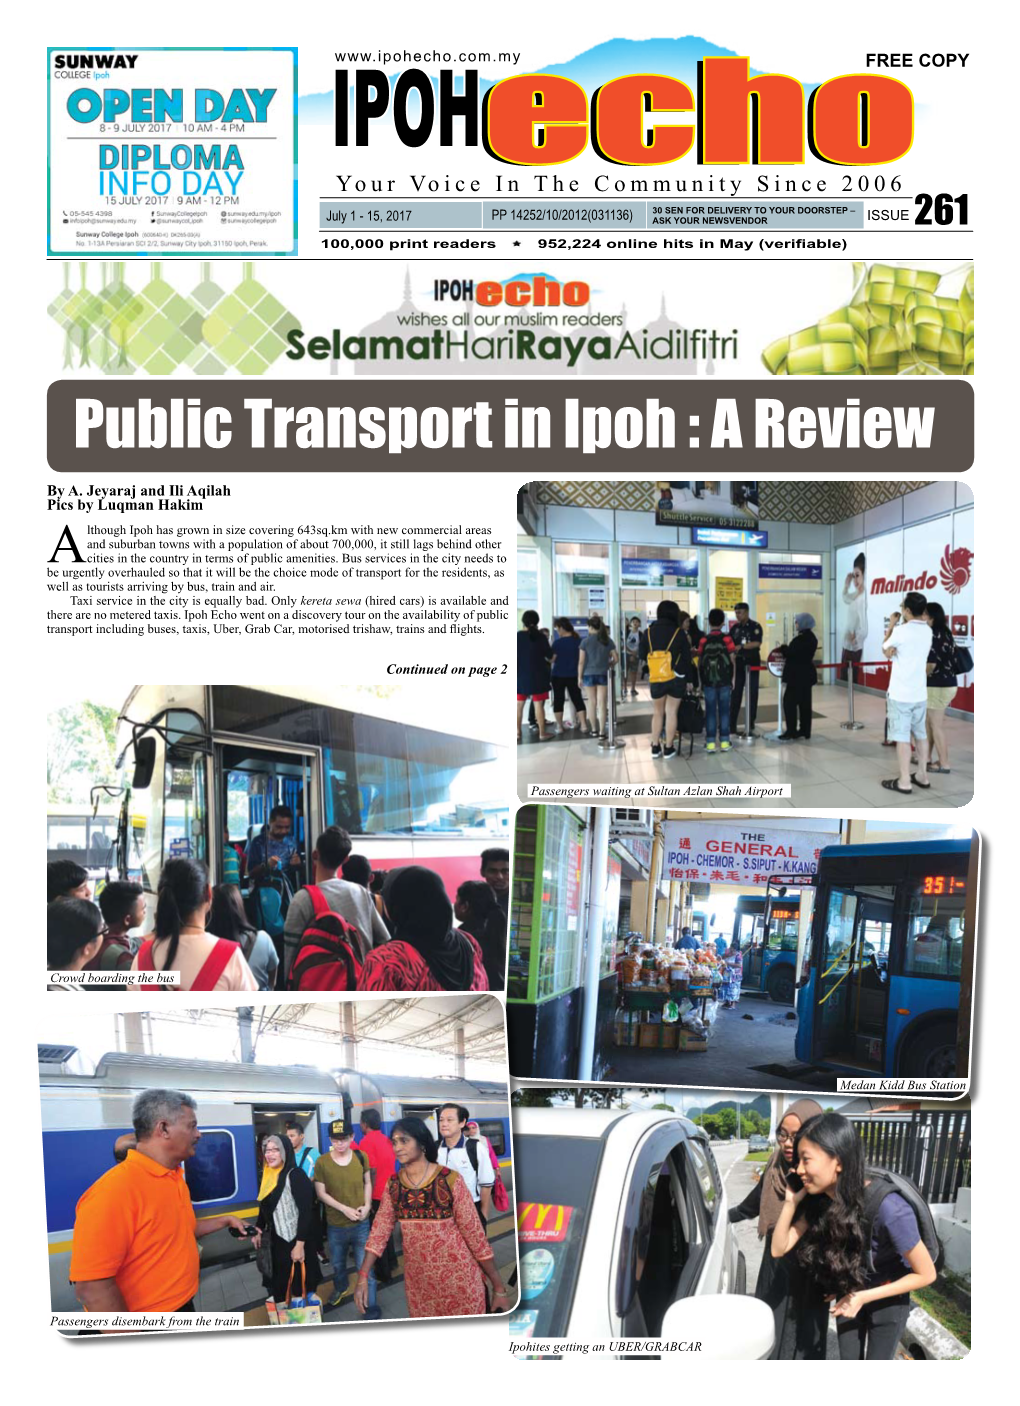 Public Transport in Ipoh : a Review